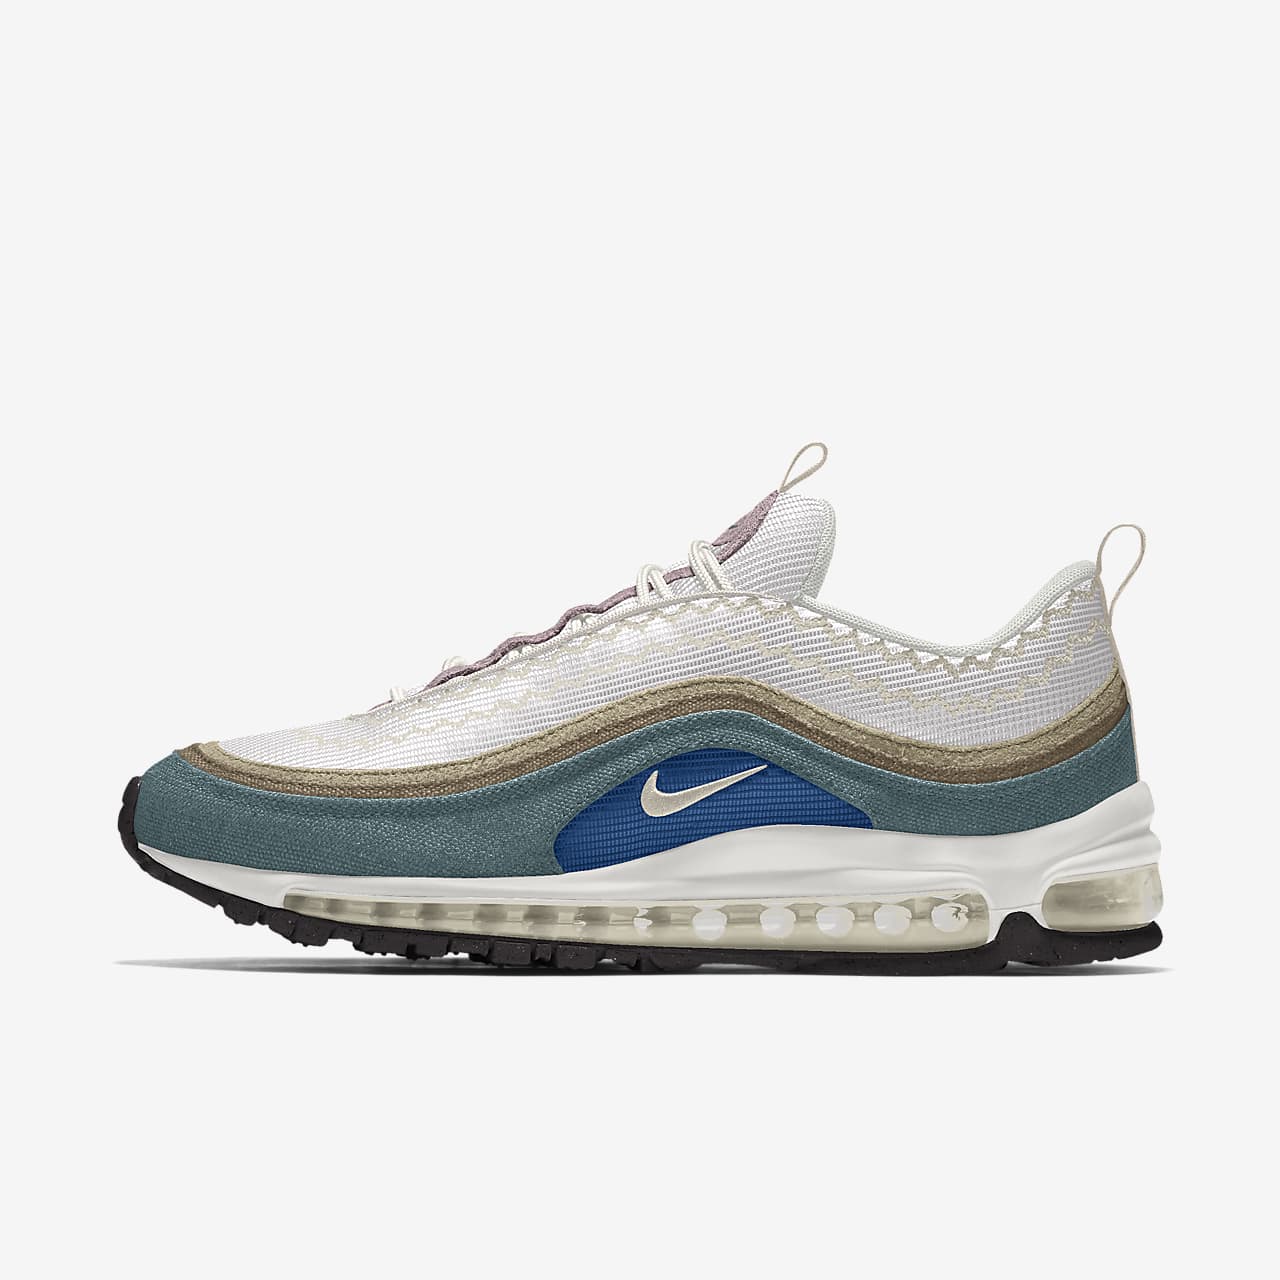 Chaussure personnalisable Nike Air Max 97 Unlocked By You pour Femme